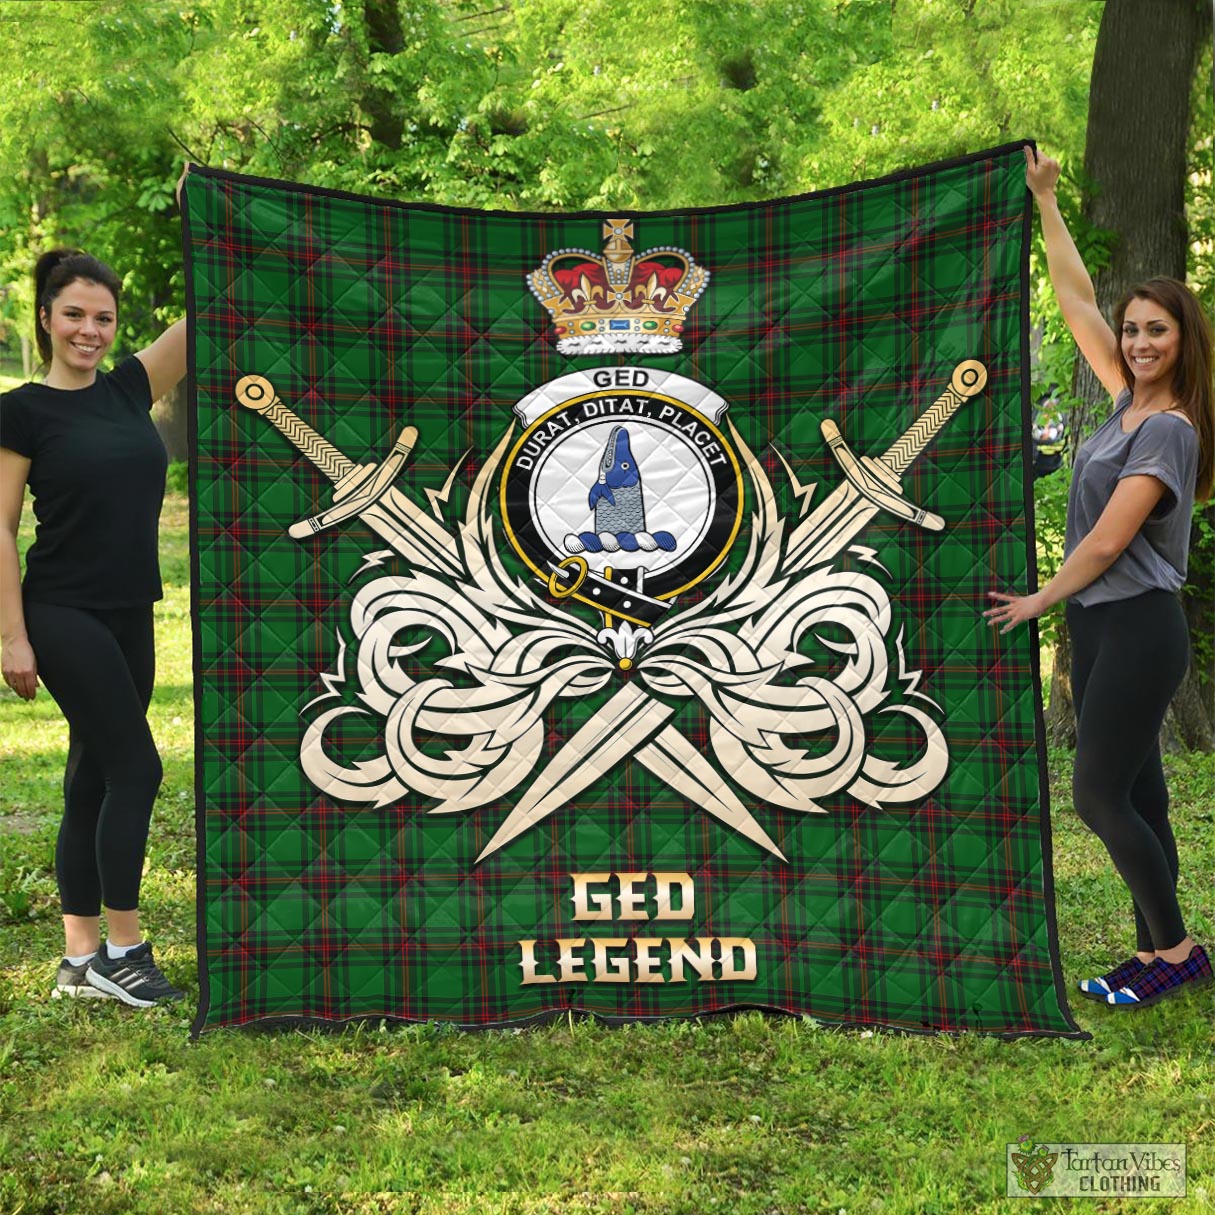 Tartan Vibes Clothing Ged Tartan Quilt with Clan Crest and the Golden Sword of Courageous Legacy